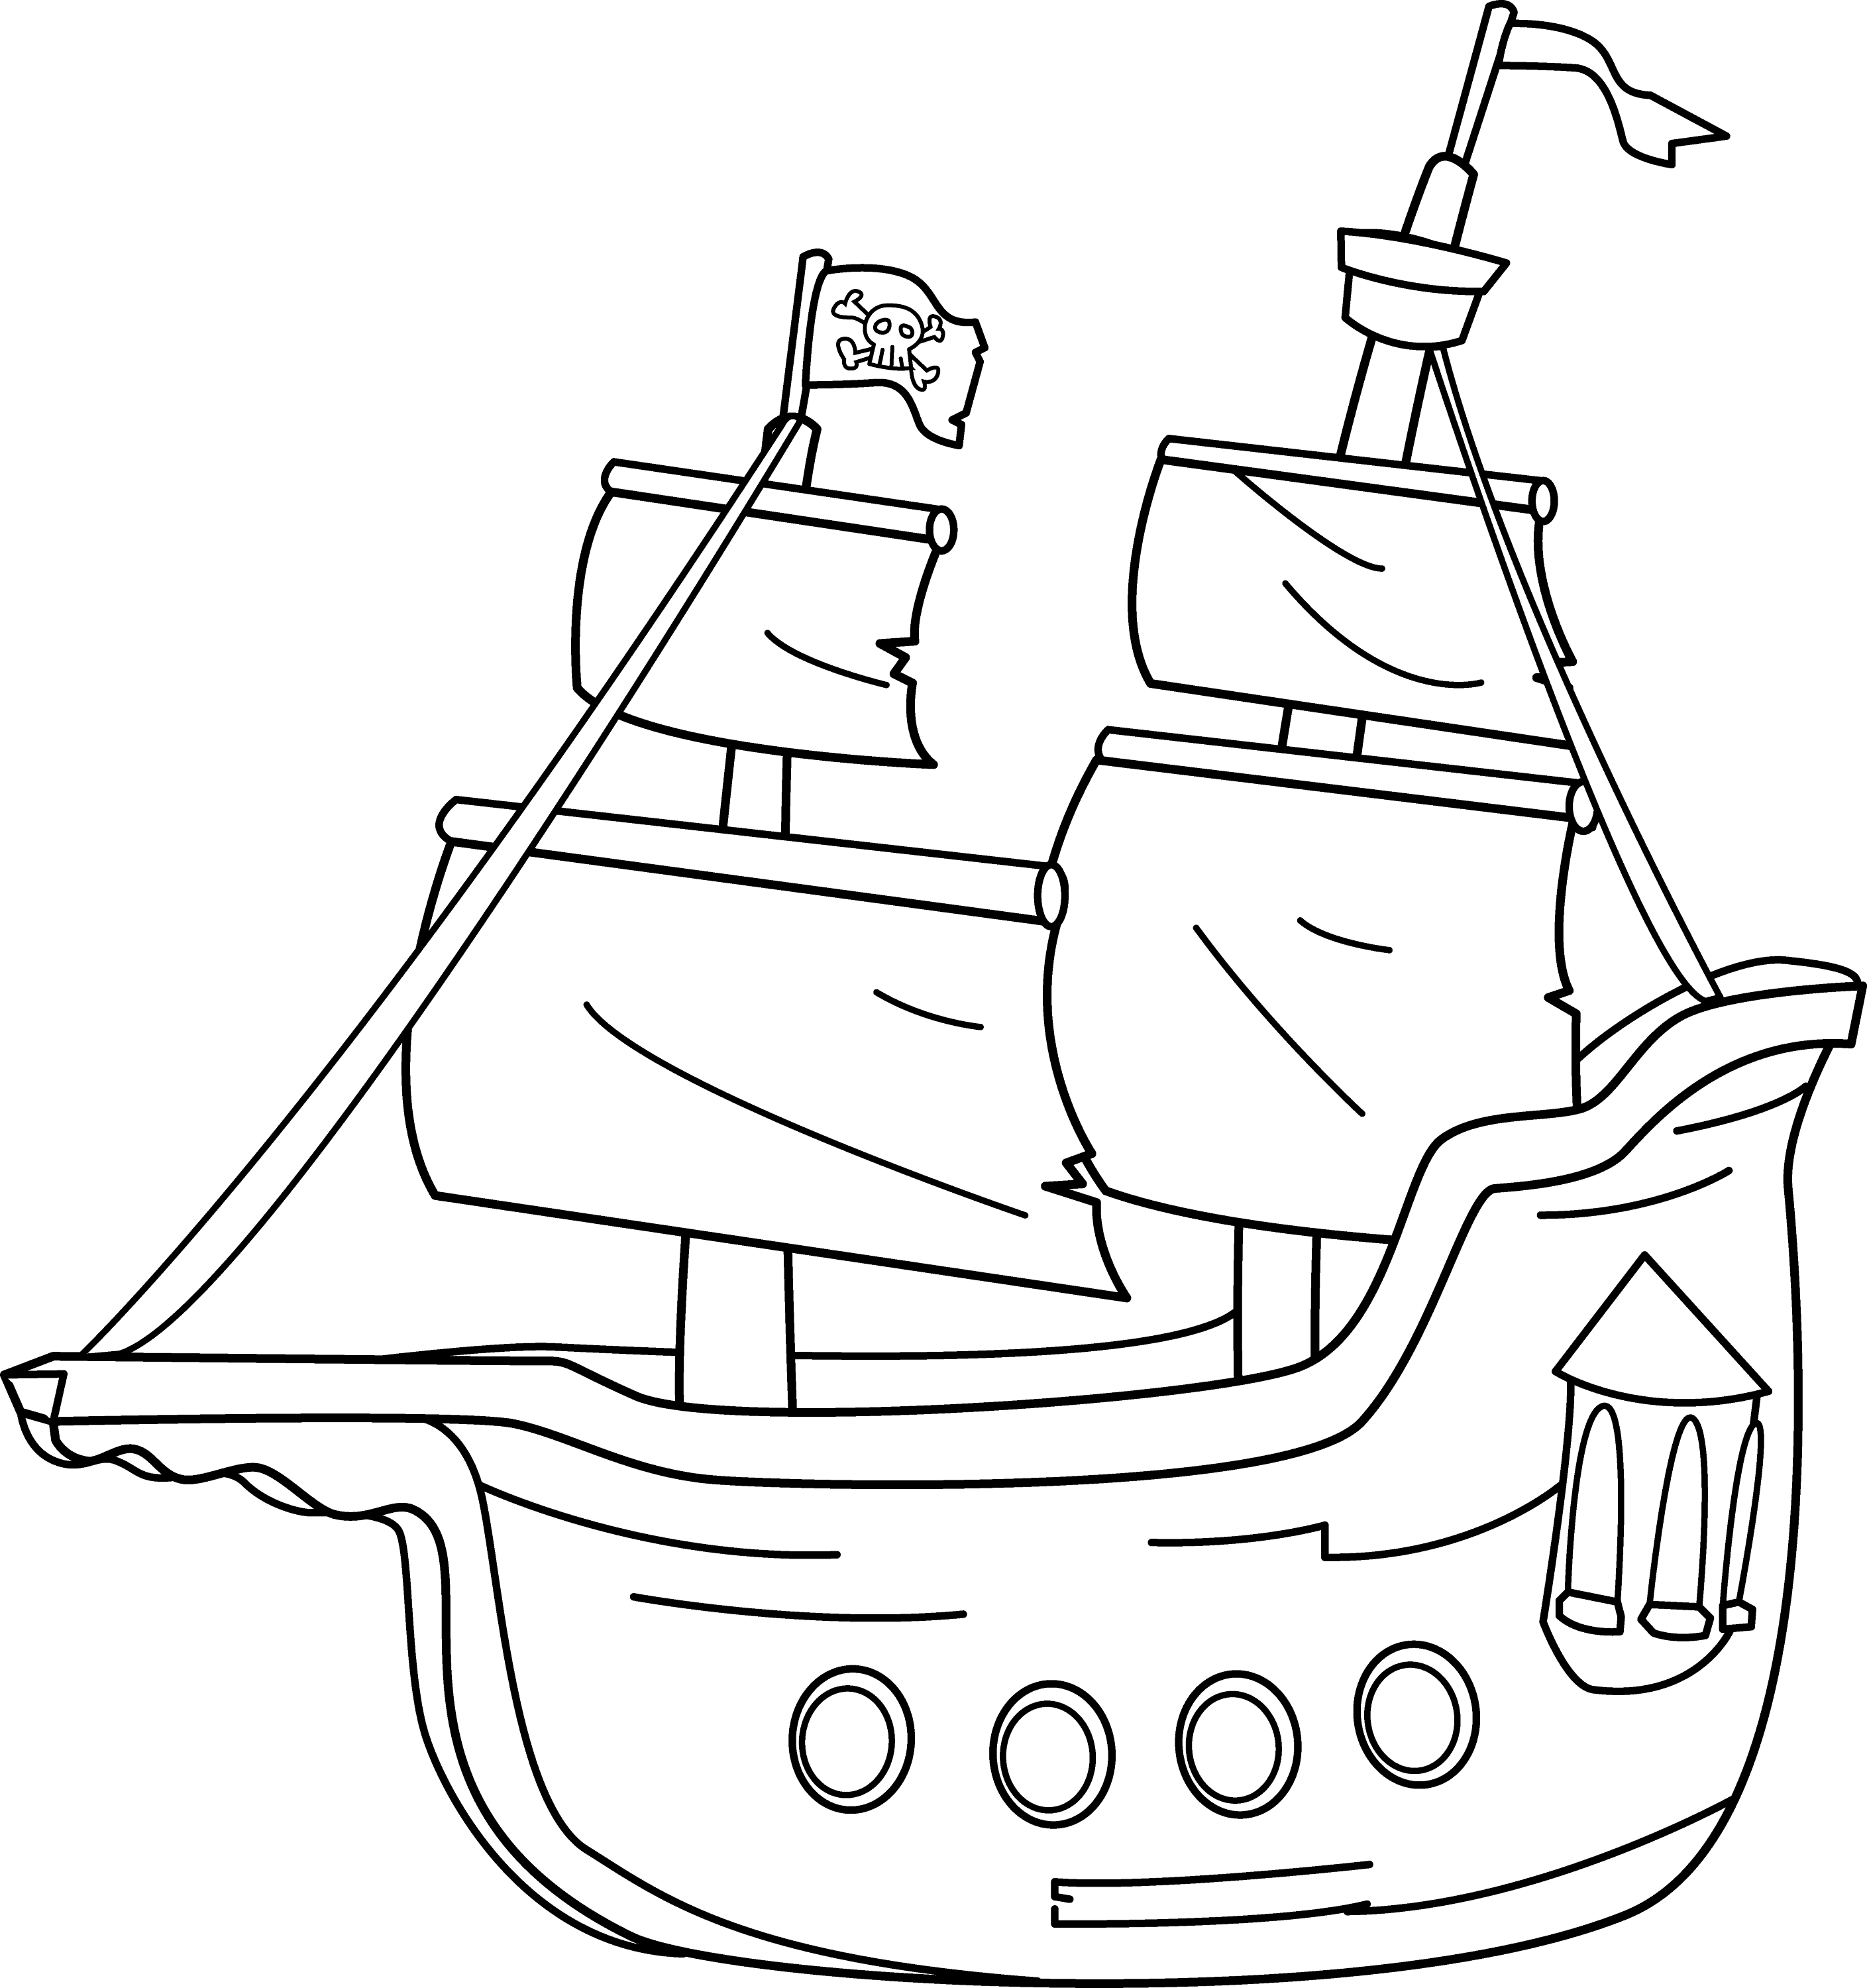 pirate-ship-coloring-page-free-clip-art